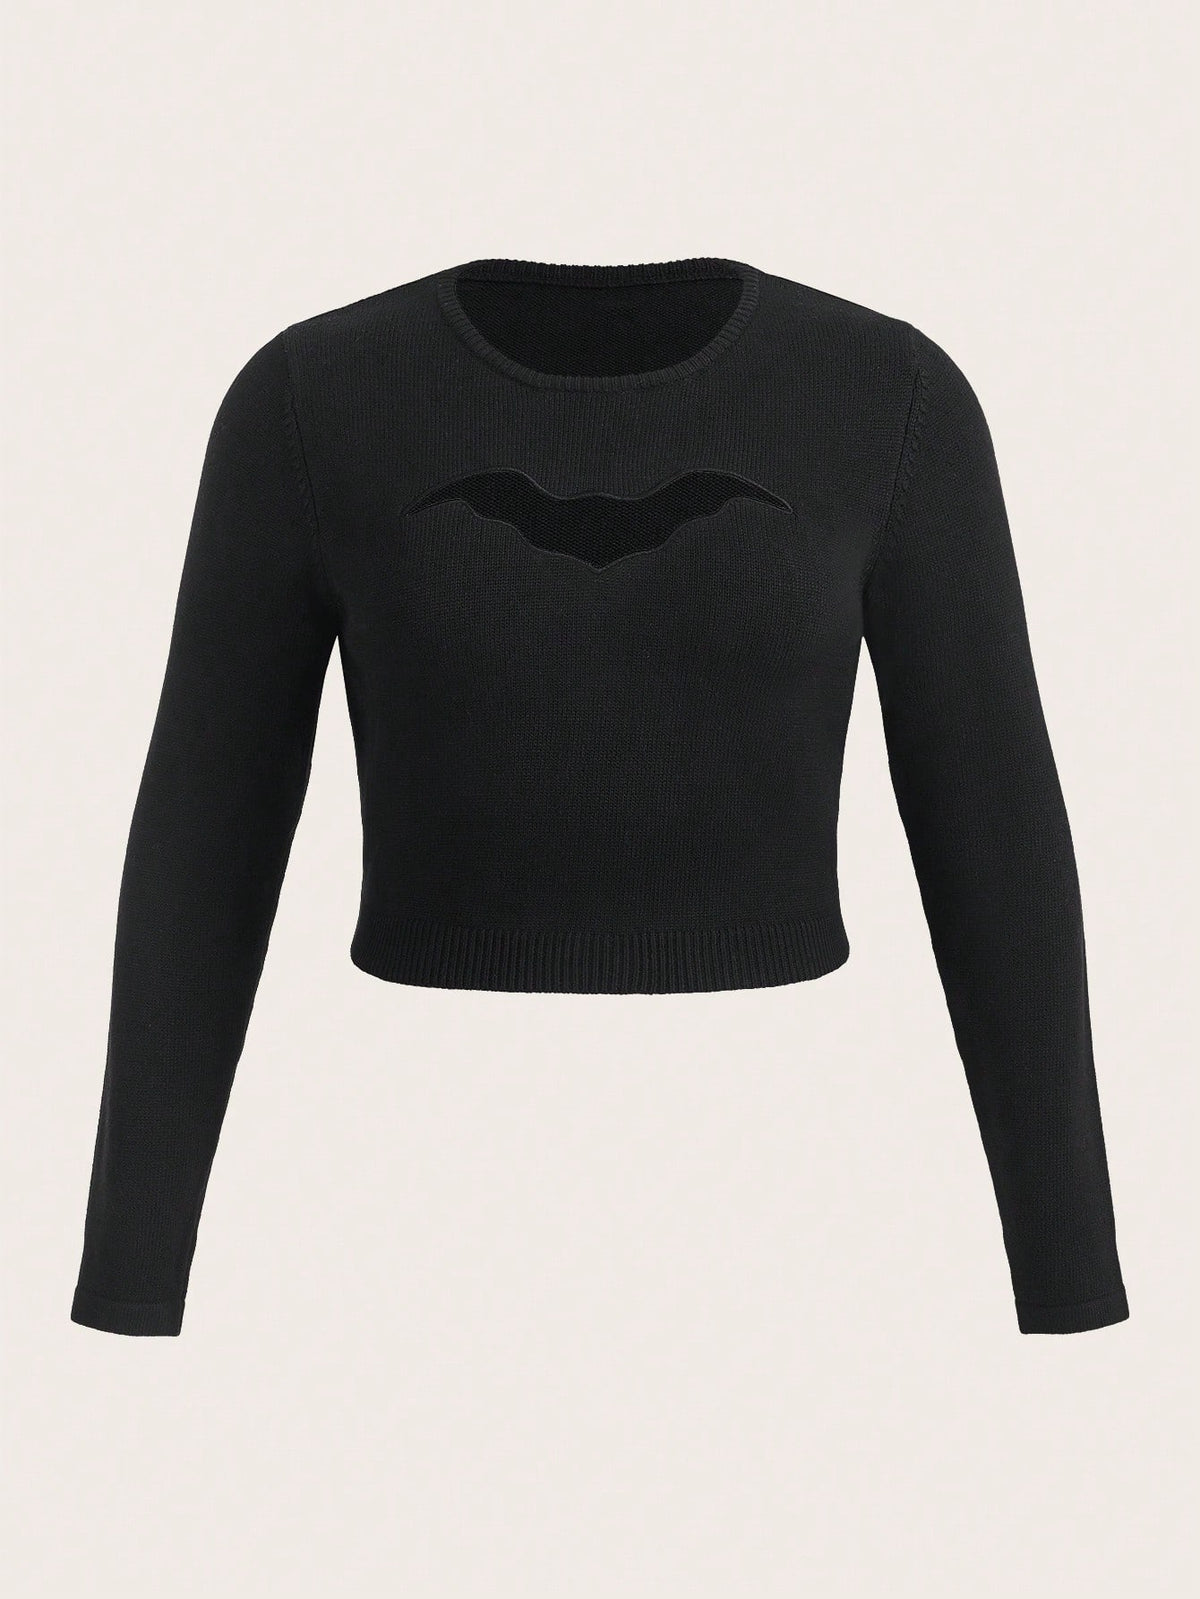 Iconic Plus Size Cut-Out Front Crop Sweater